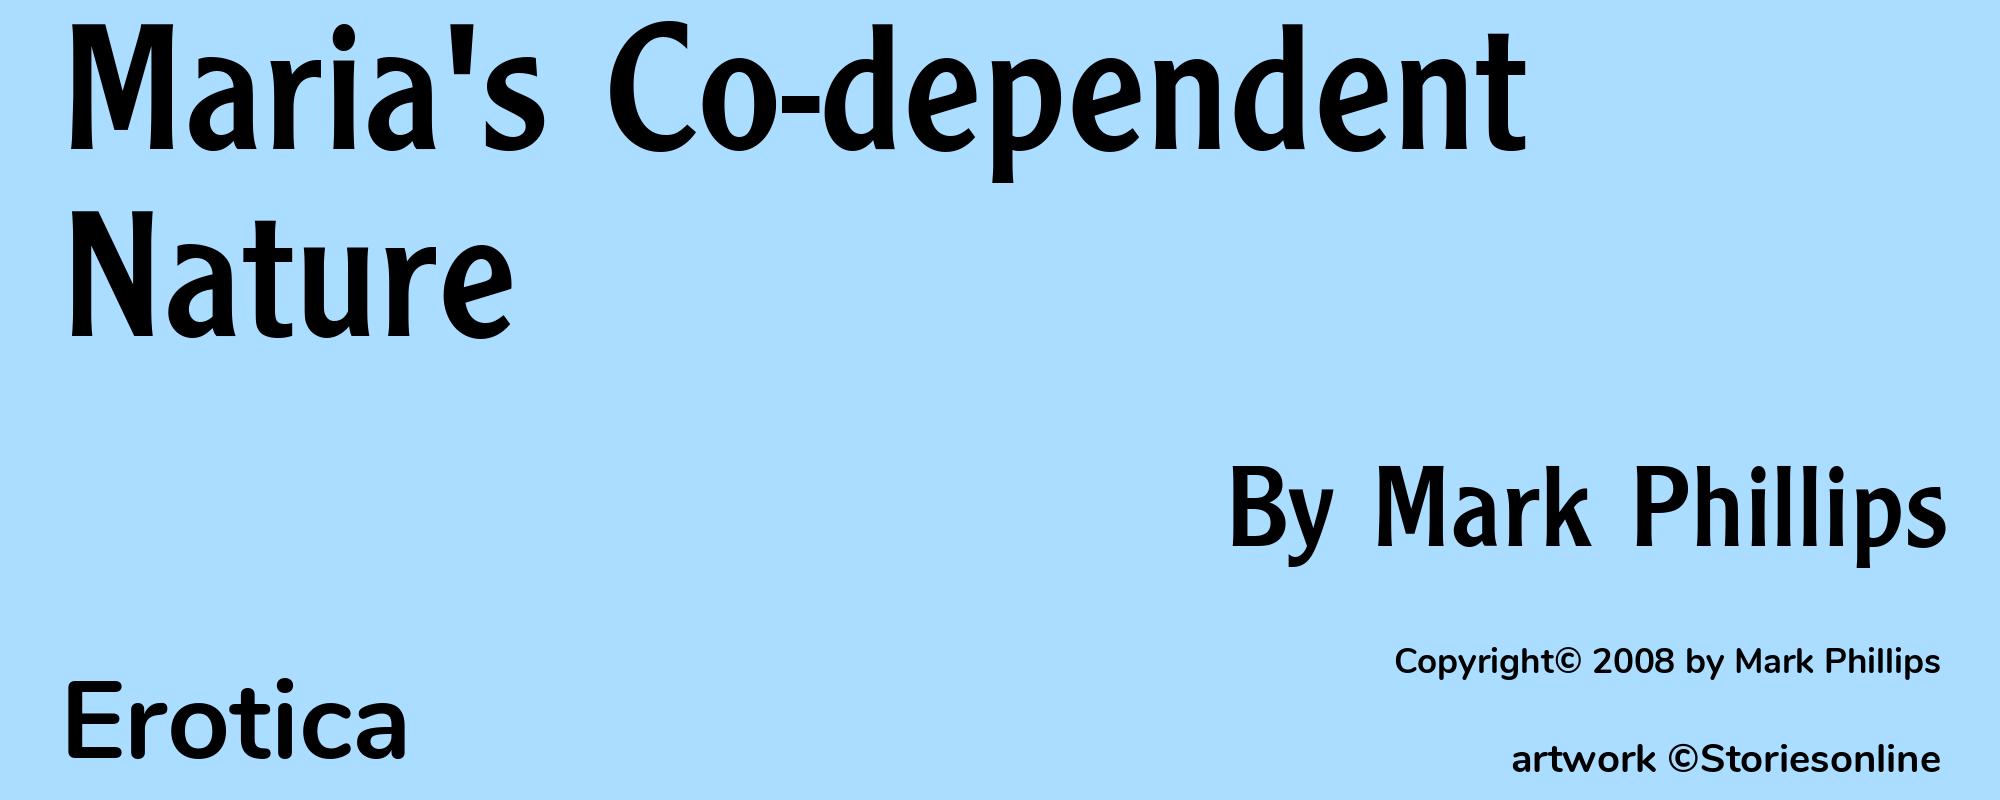 Maria's Co-dependent Nature - Cover